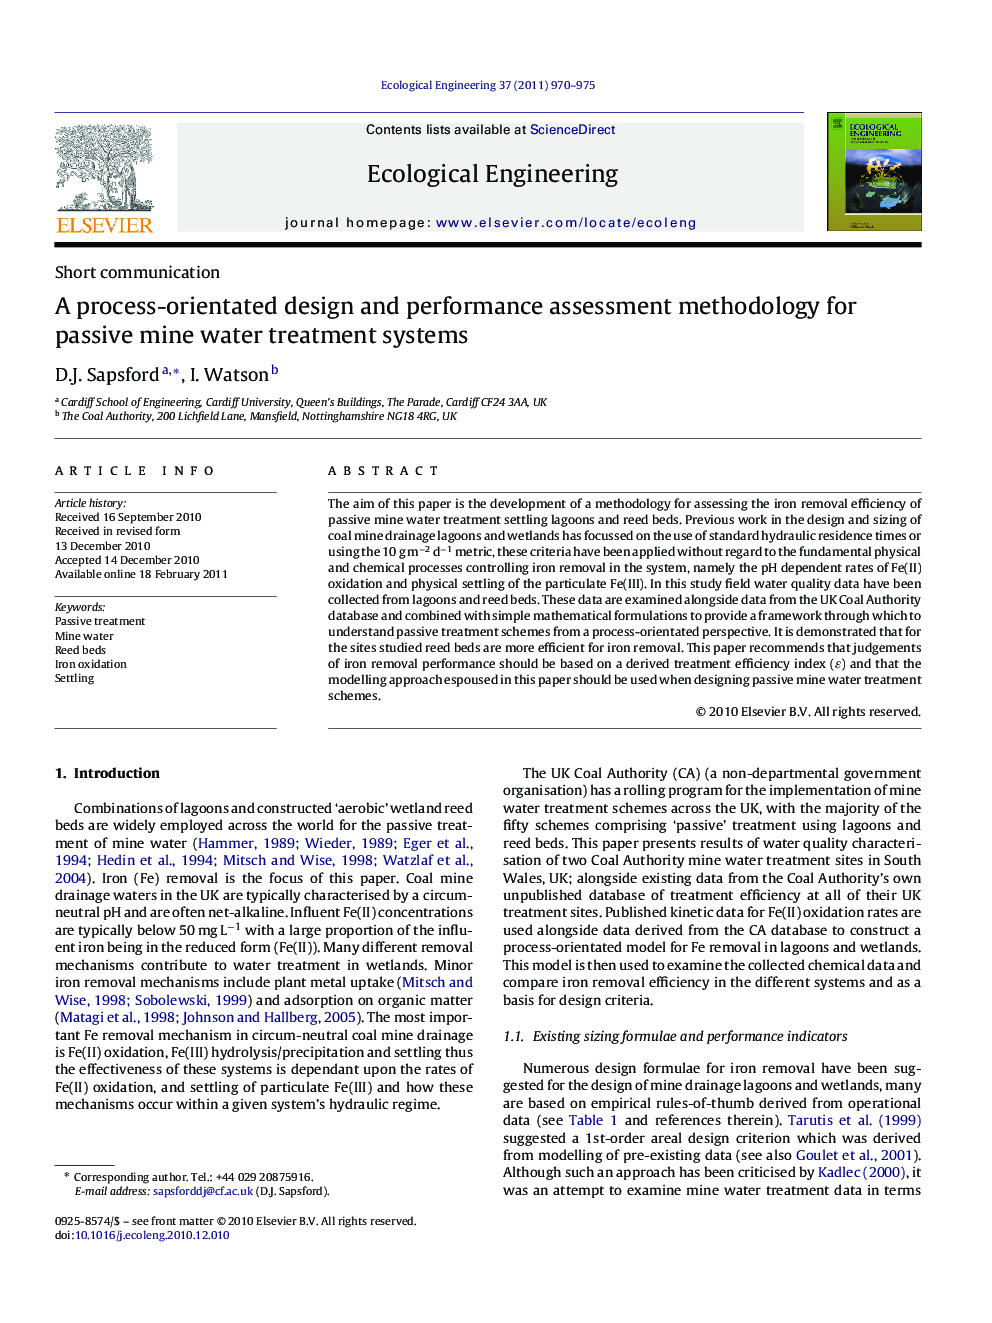 A process-orientated design and performance assessment methodology for passive mine water treatment systems